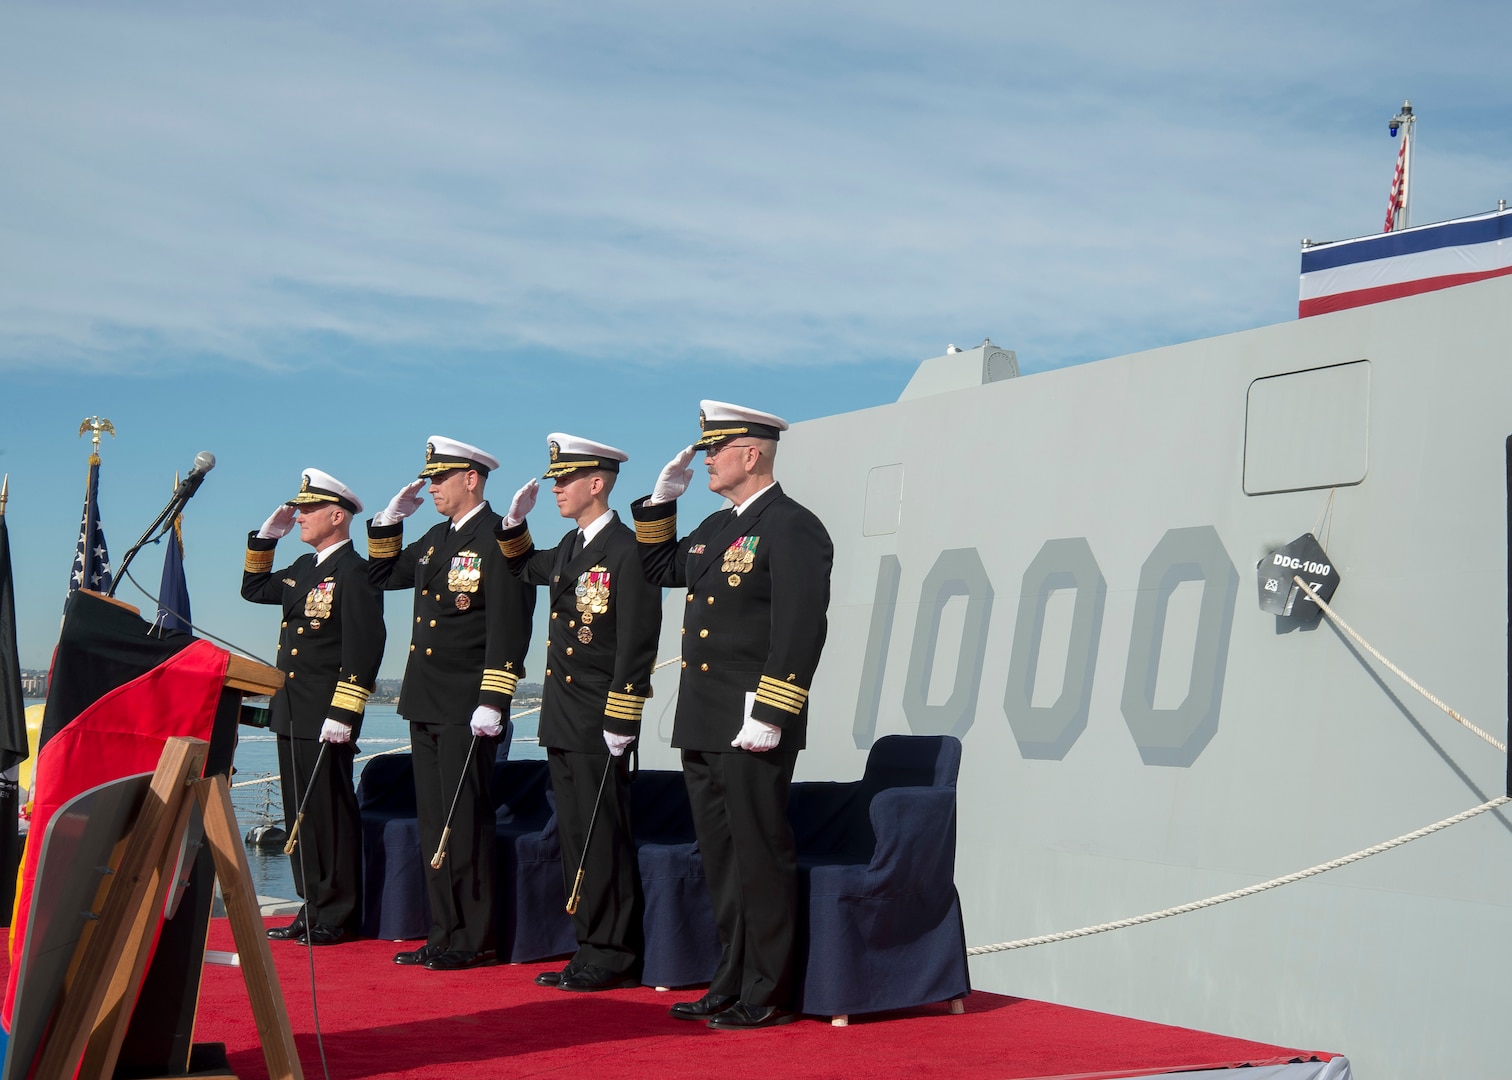 SAN DIEGO (Dec. 20, 2016) Left to right, Vice Adm. Thomas Rowden, commander, Naval Surface Forces, Capt. James A. Kirk, outgoing commanding officer (CO) of  guided-missile destroyer USS Zumwalt (DDG 1000), Capt. Scott A. Tait, in-coming CO of Zumwalt, and Capt. W. Kyle Fauntleroy, Force Chaplain, Surface Force, U.S. Pacific Fleet, salute the ensign during a change of command ceremony at Naval Base San Diego. (U.S. Navy photo by Petty Officer 2nd Class Zachary Bell/Released)